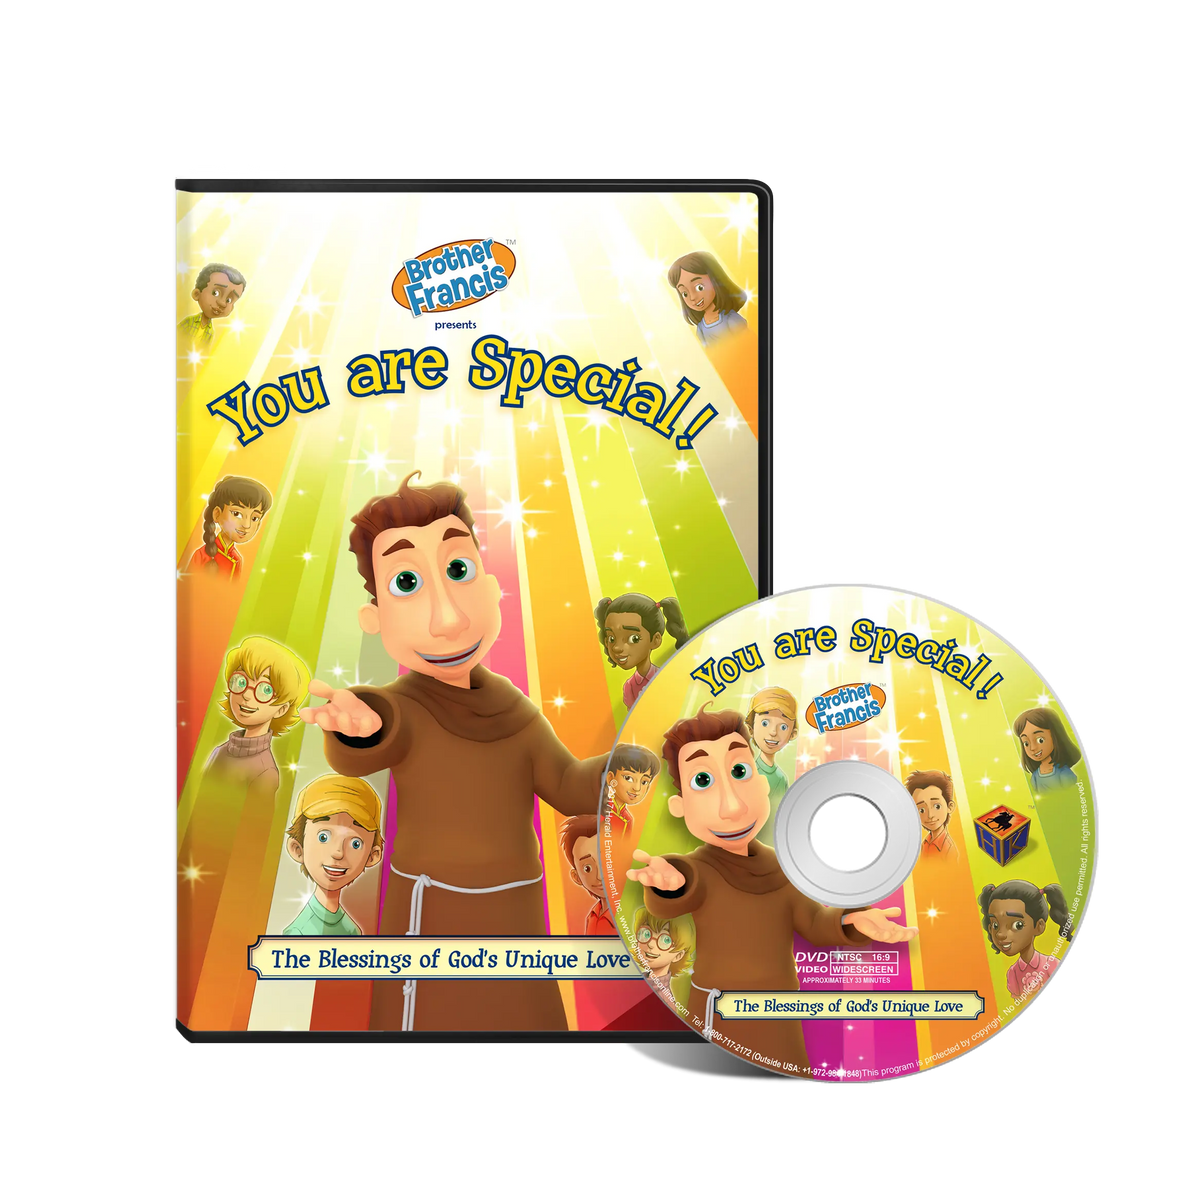 Brother Francis DVD Ep. 15: You Are Special